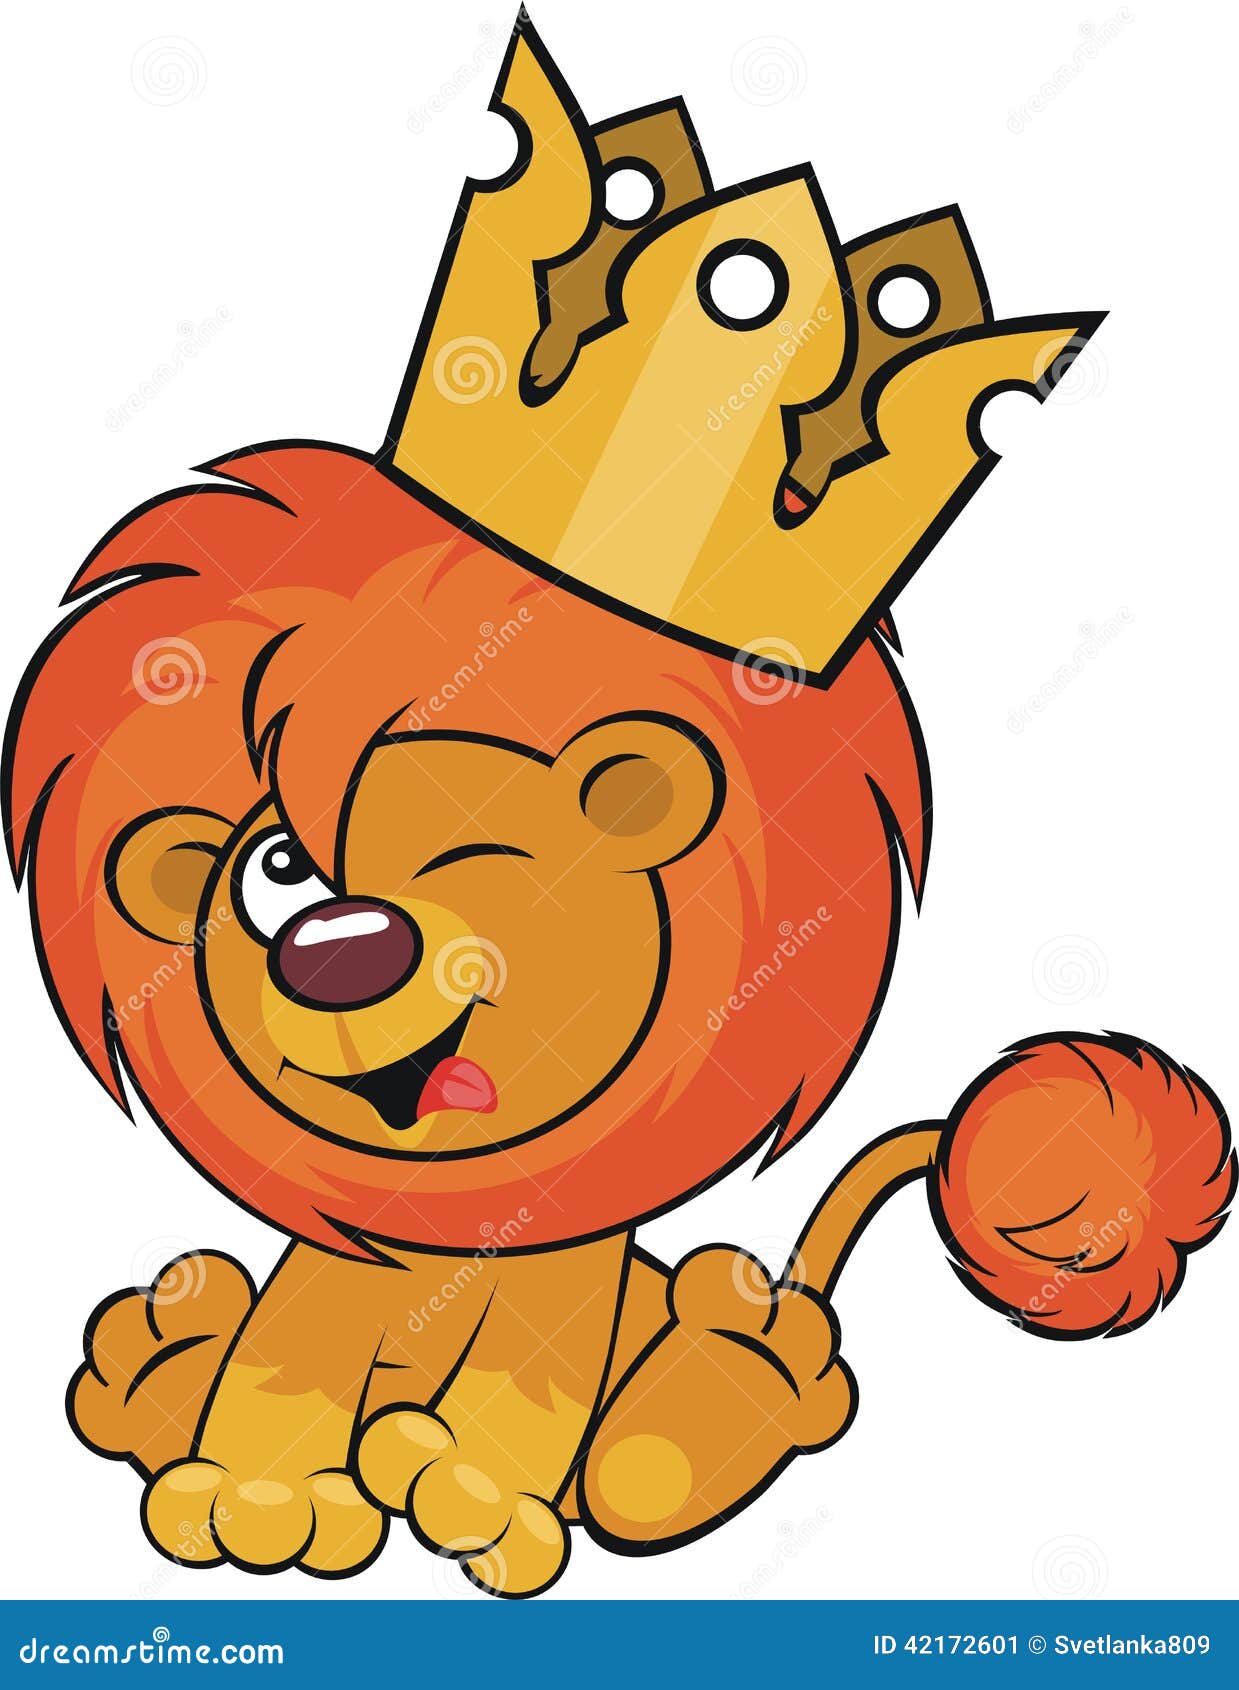 lion with crown clipart - photo #23